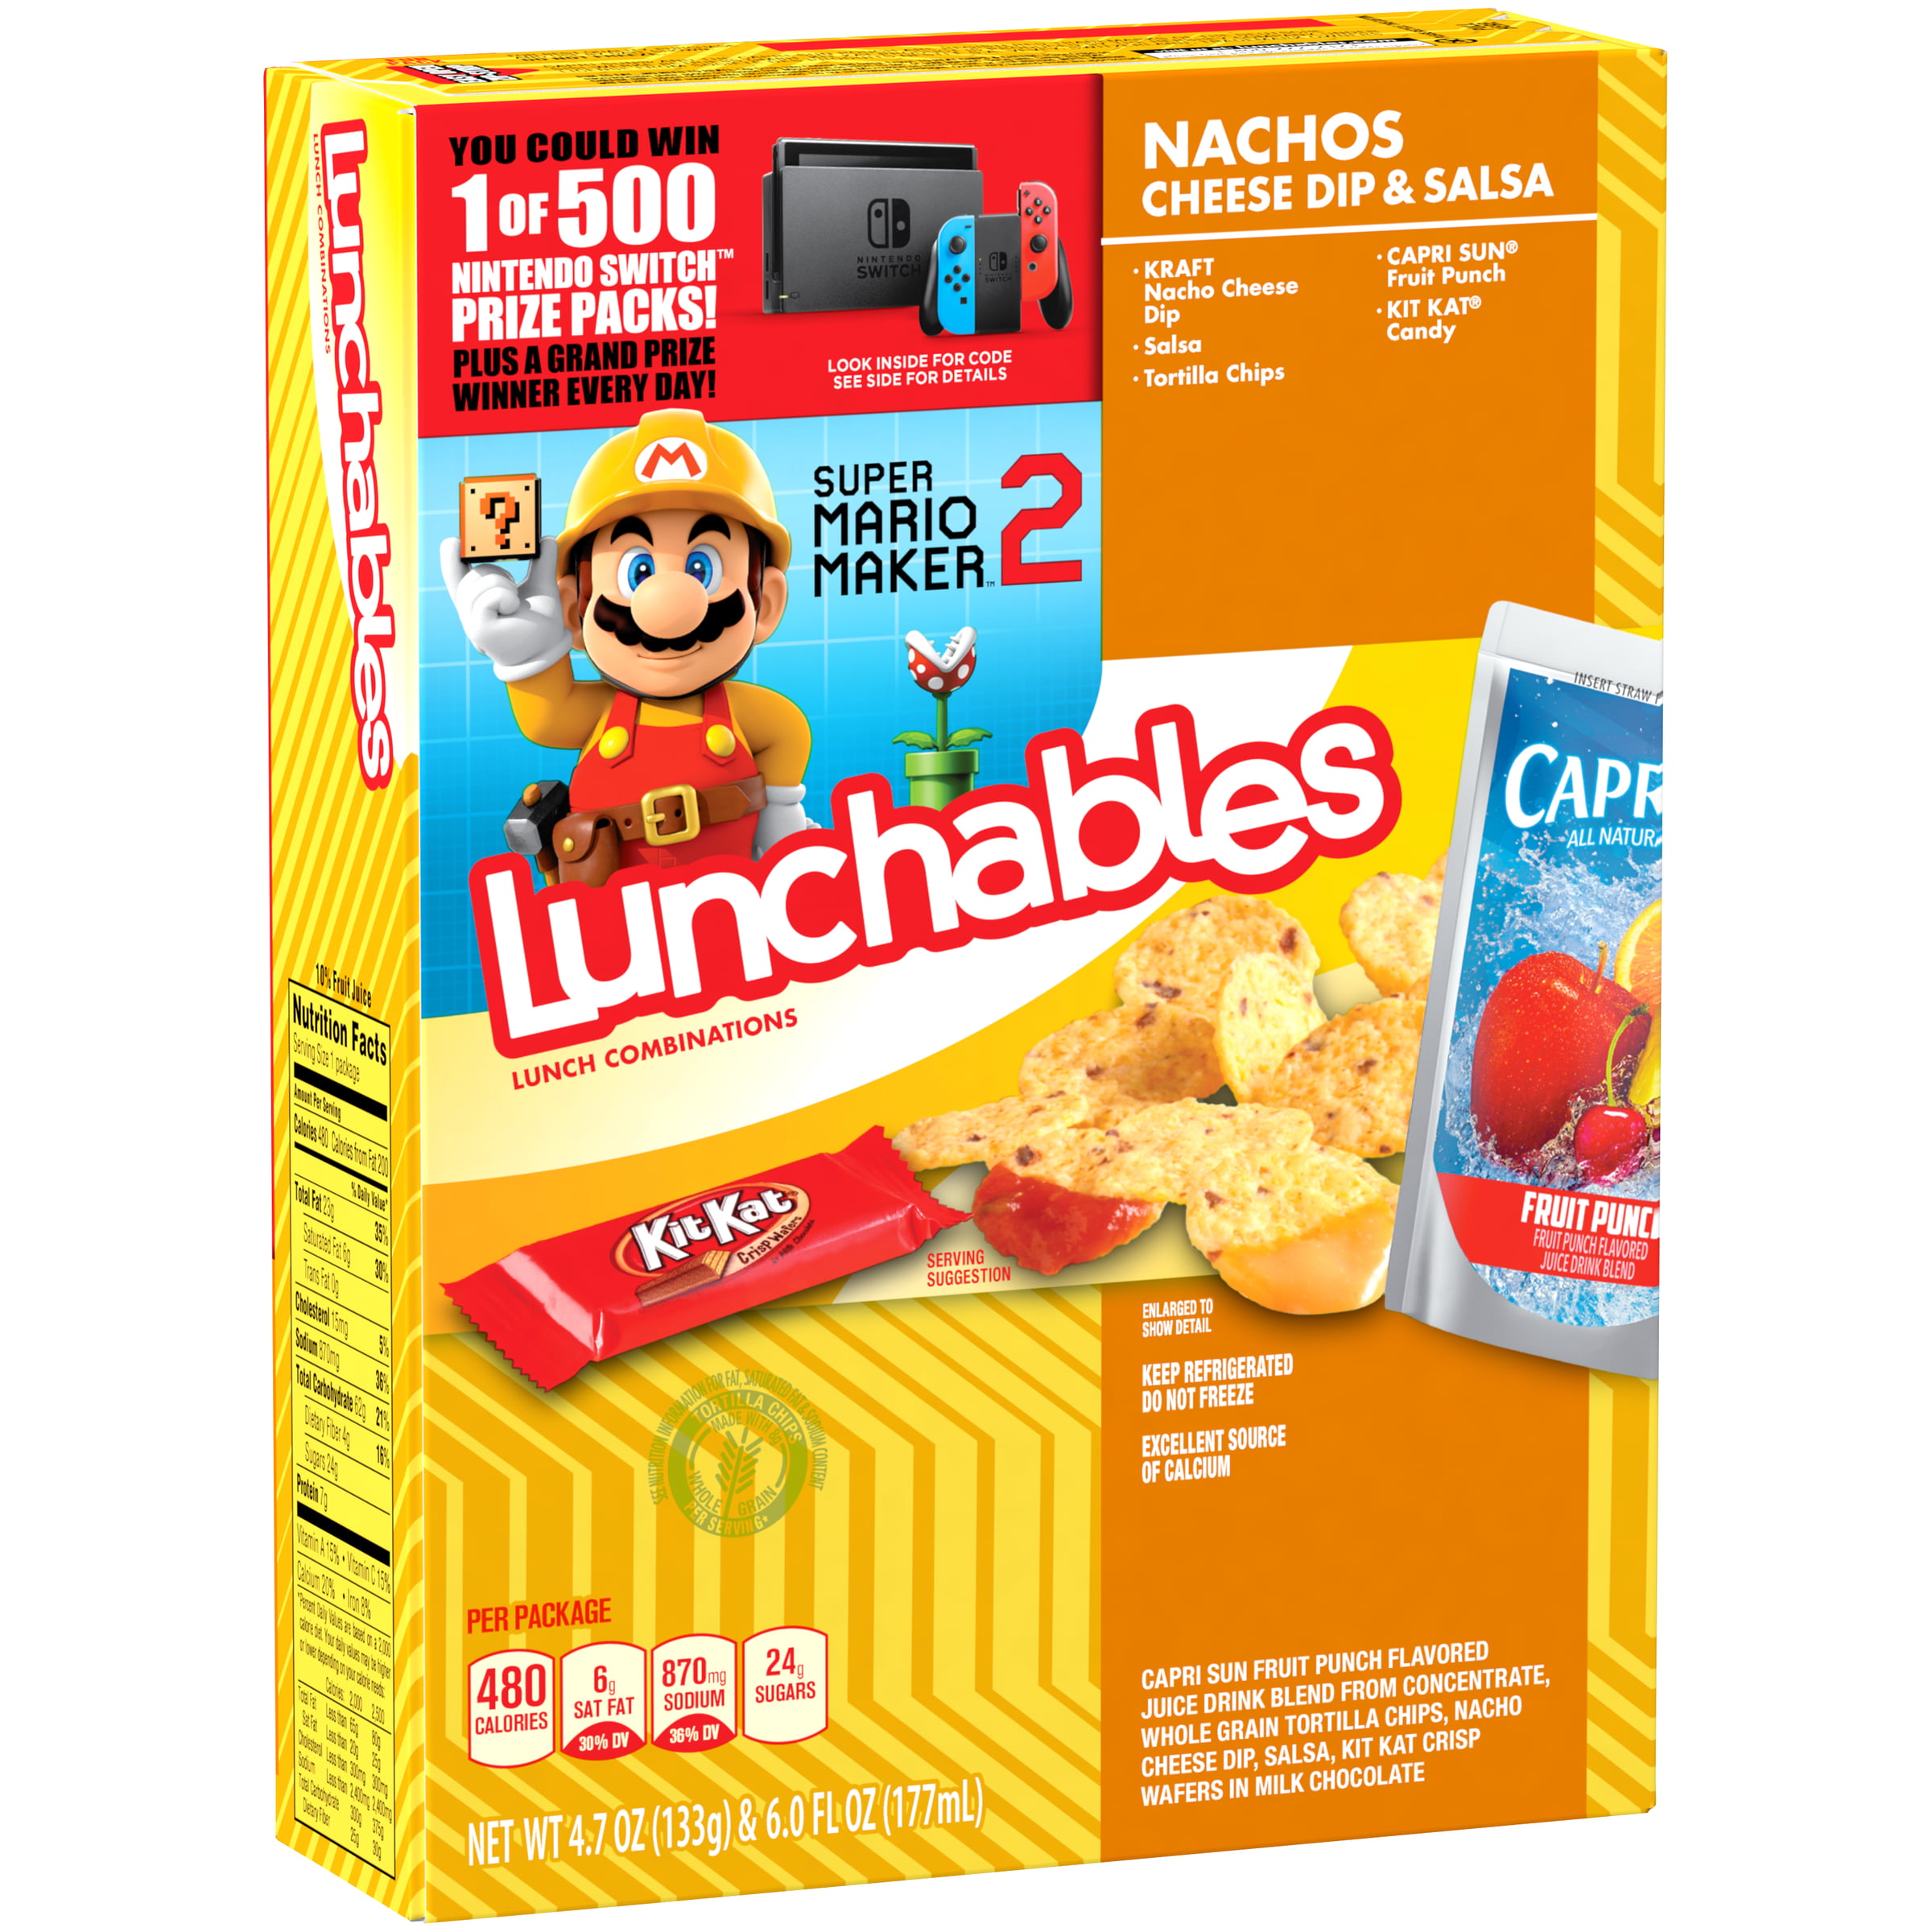 Lunchables Lunch Combinations Nacho Cheese Dip & Salsa, 10.7 oz Box